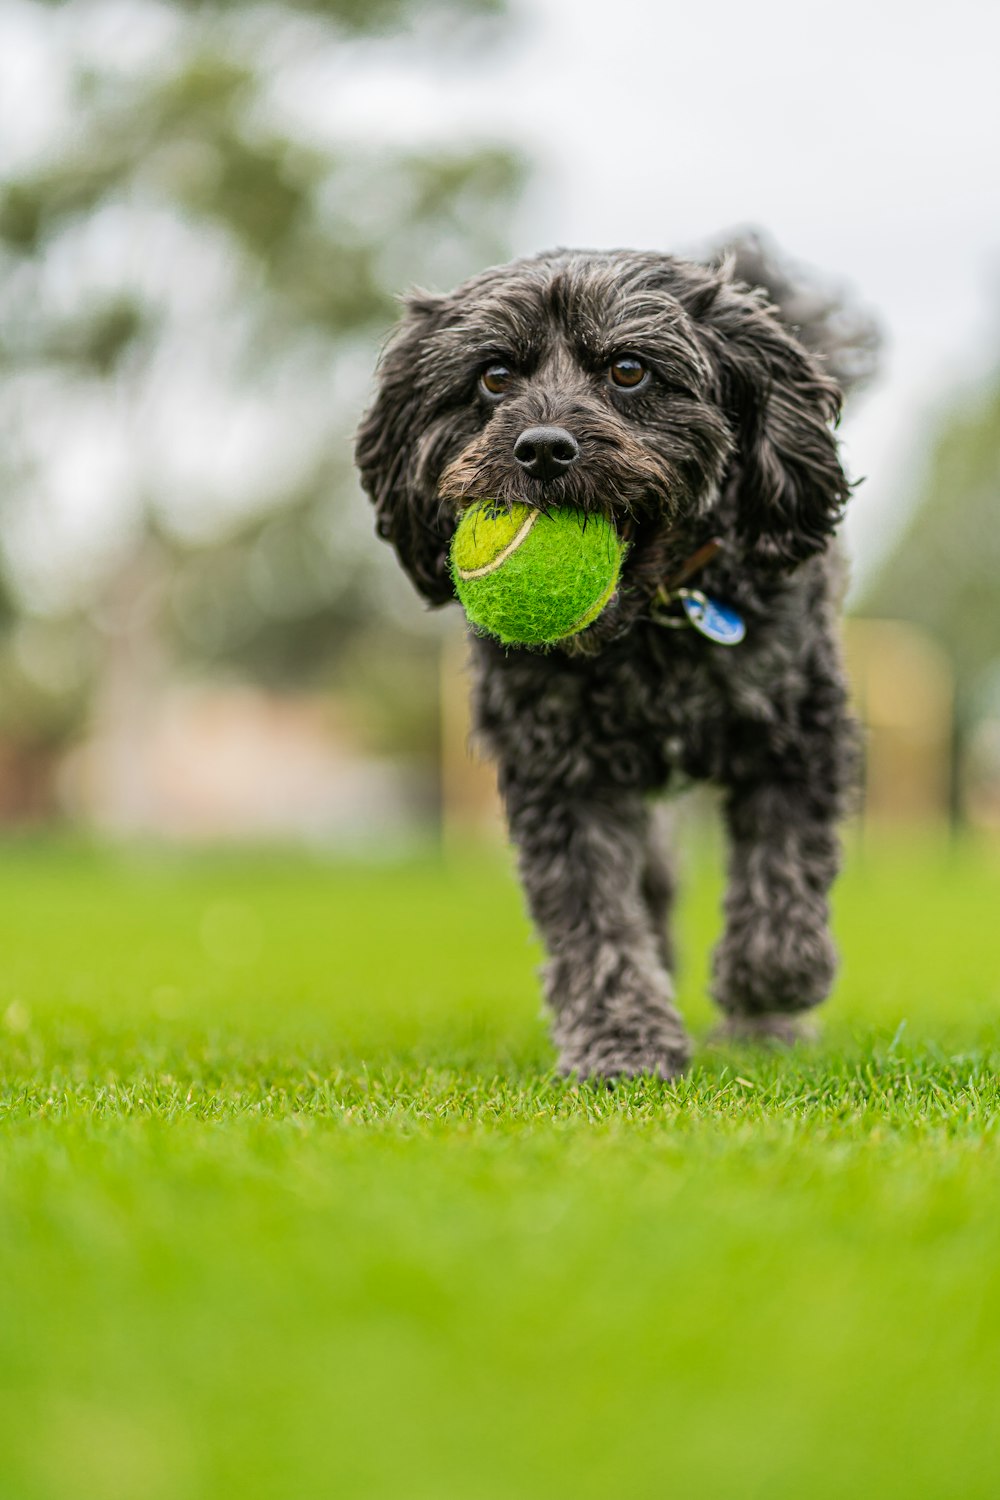 black and gray long coated small dog biting green ball on green grass during daytime